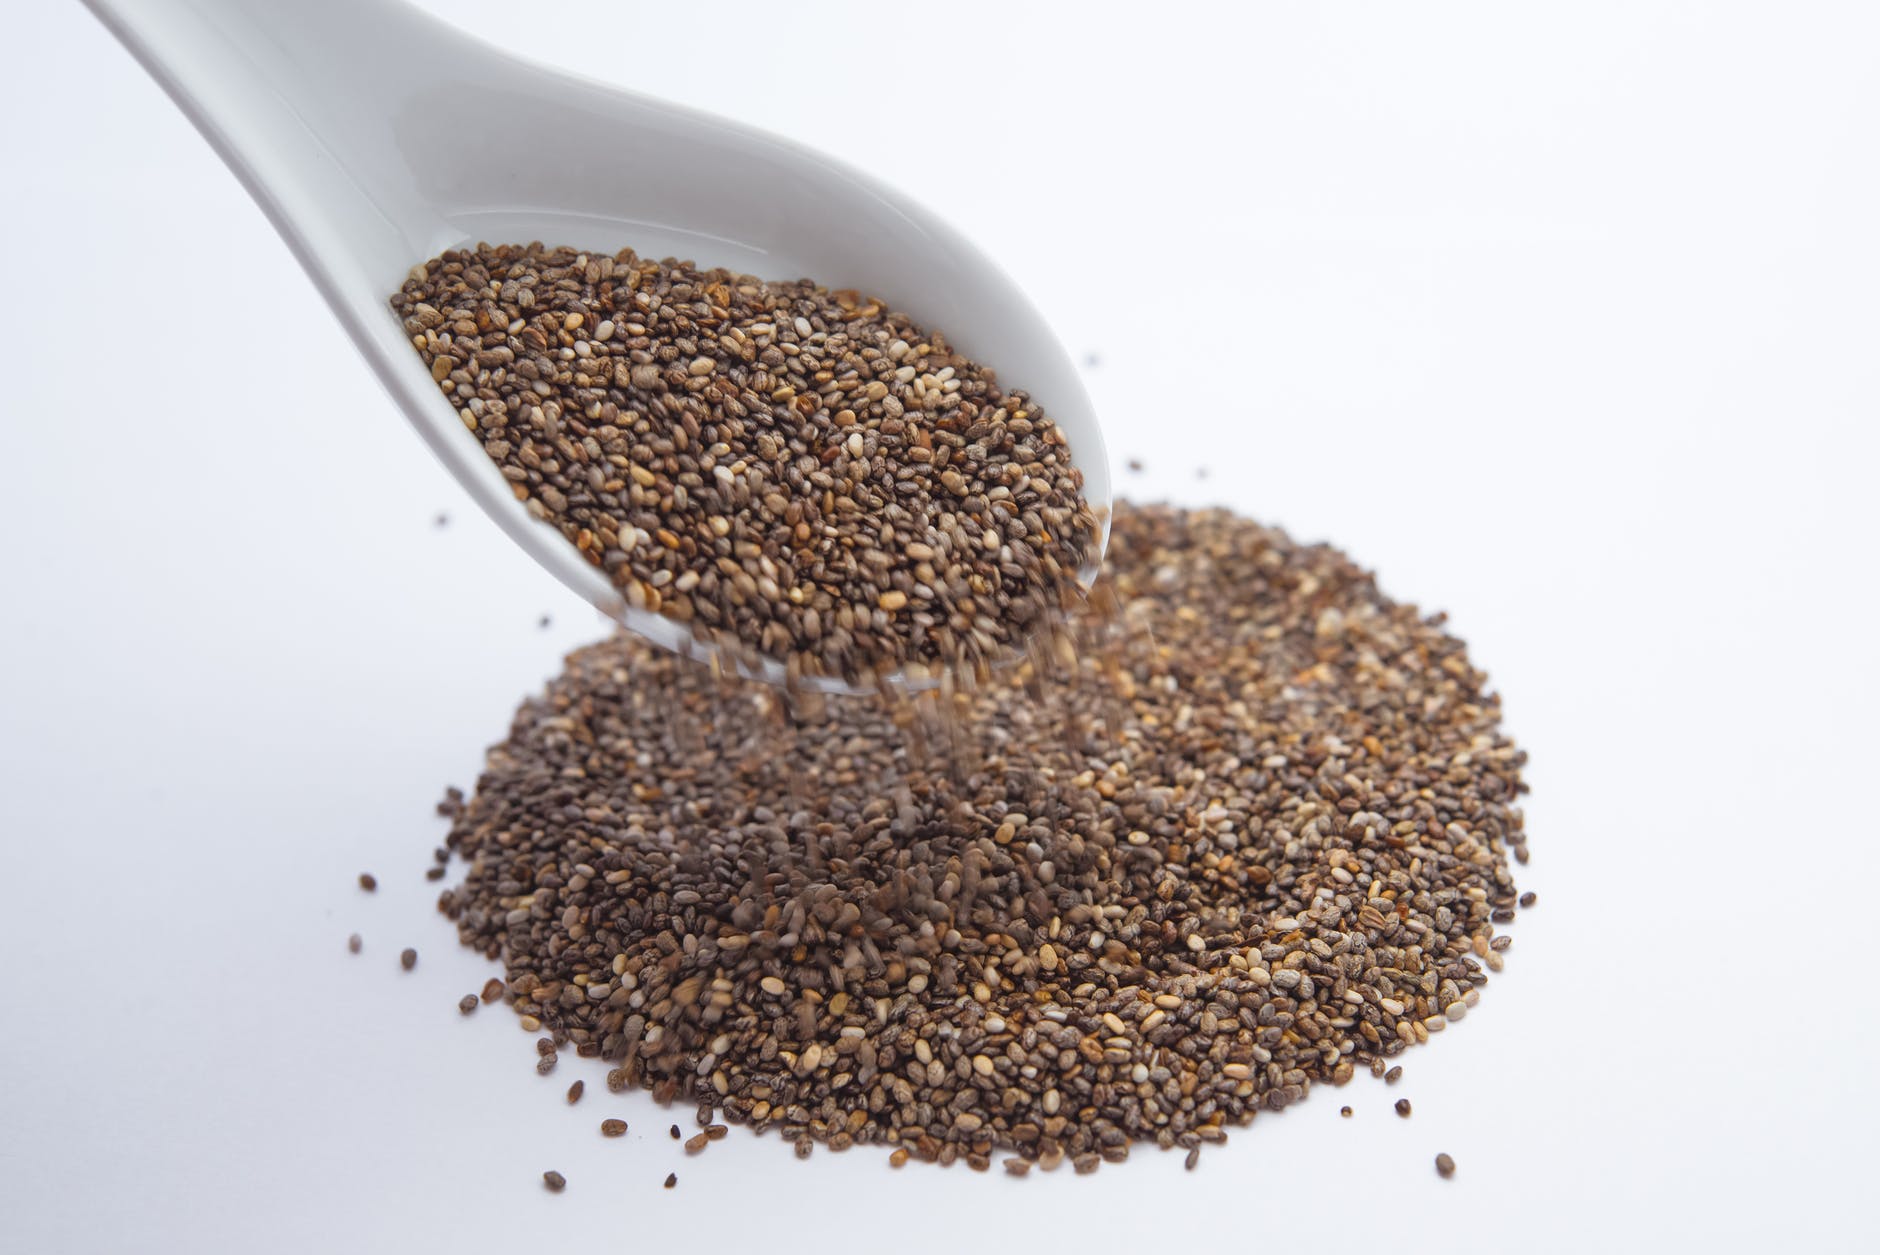 Healthy seeds are a popular super food